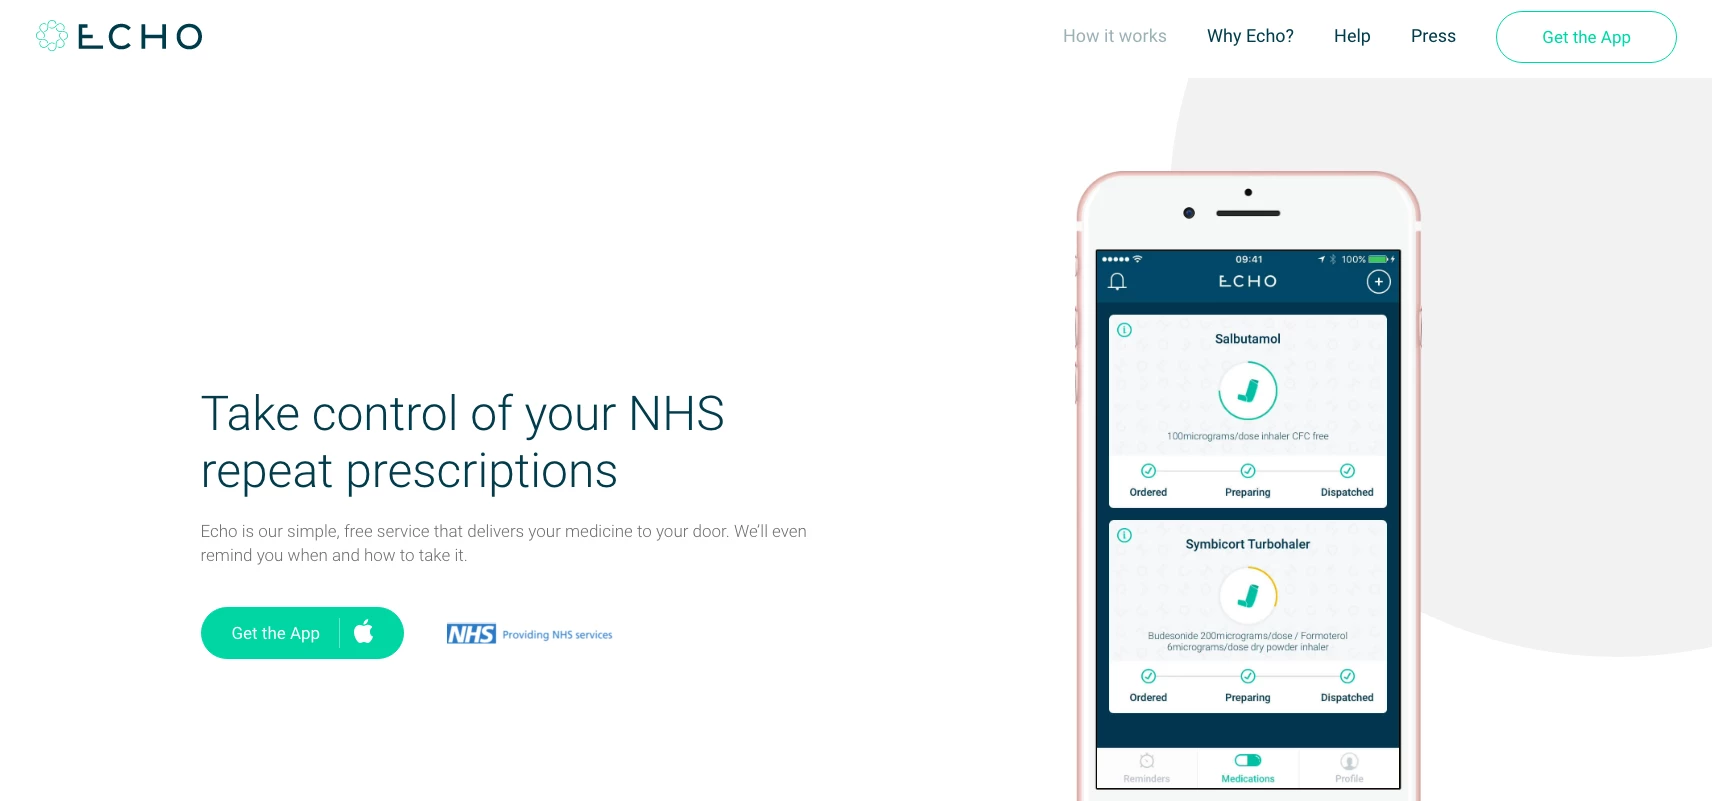 Prescription management app Echo launches today following £1.8m seed investment.